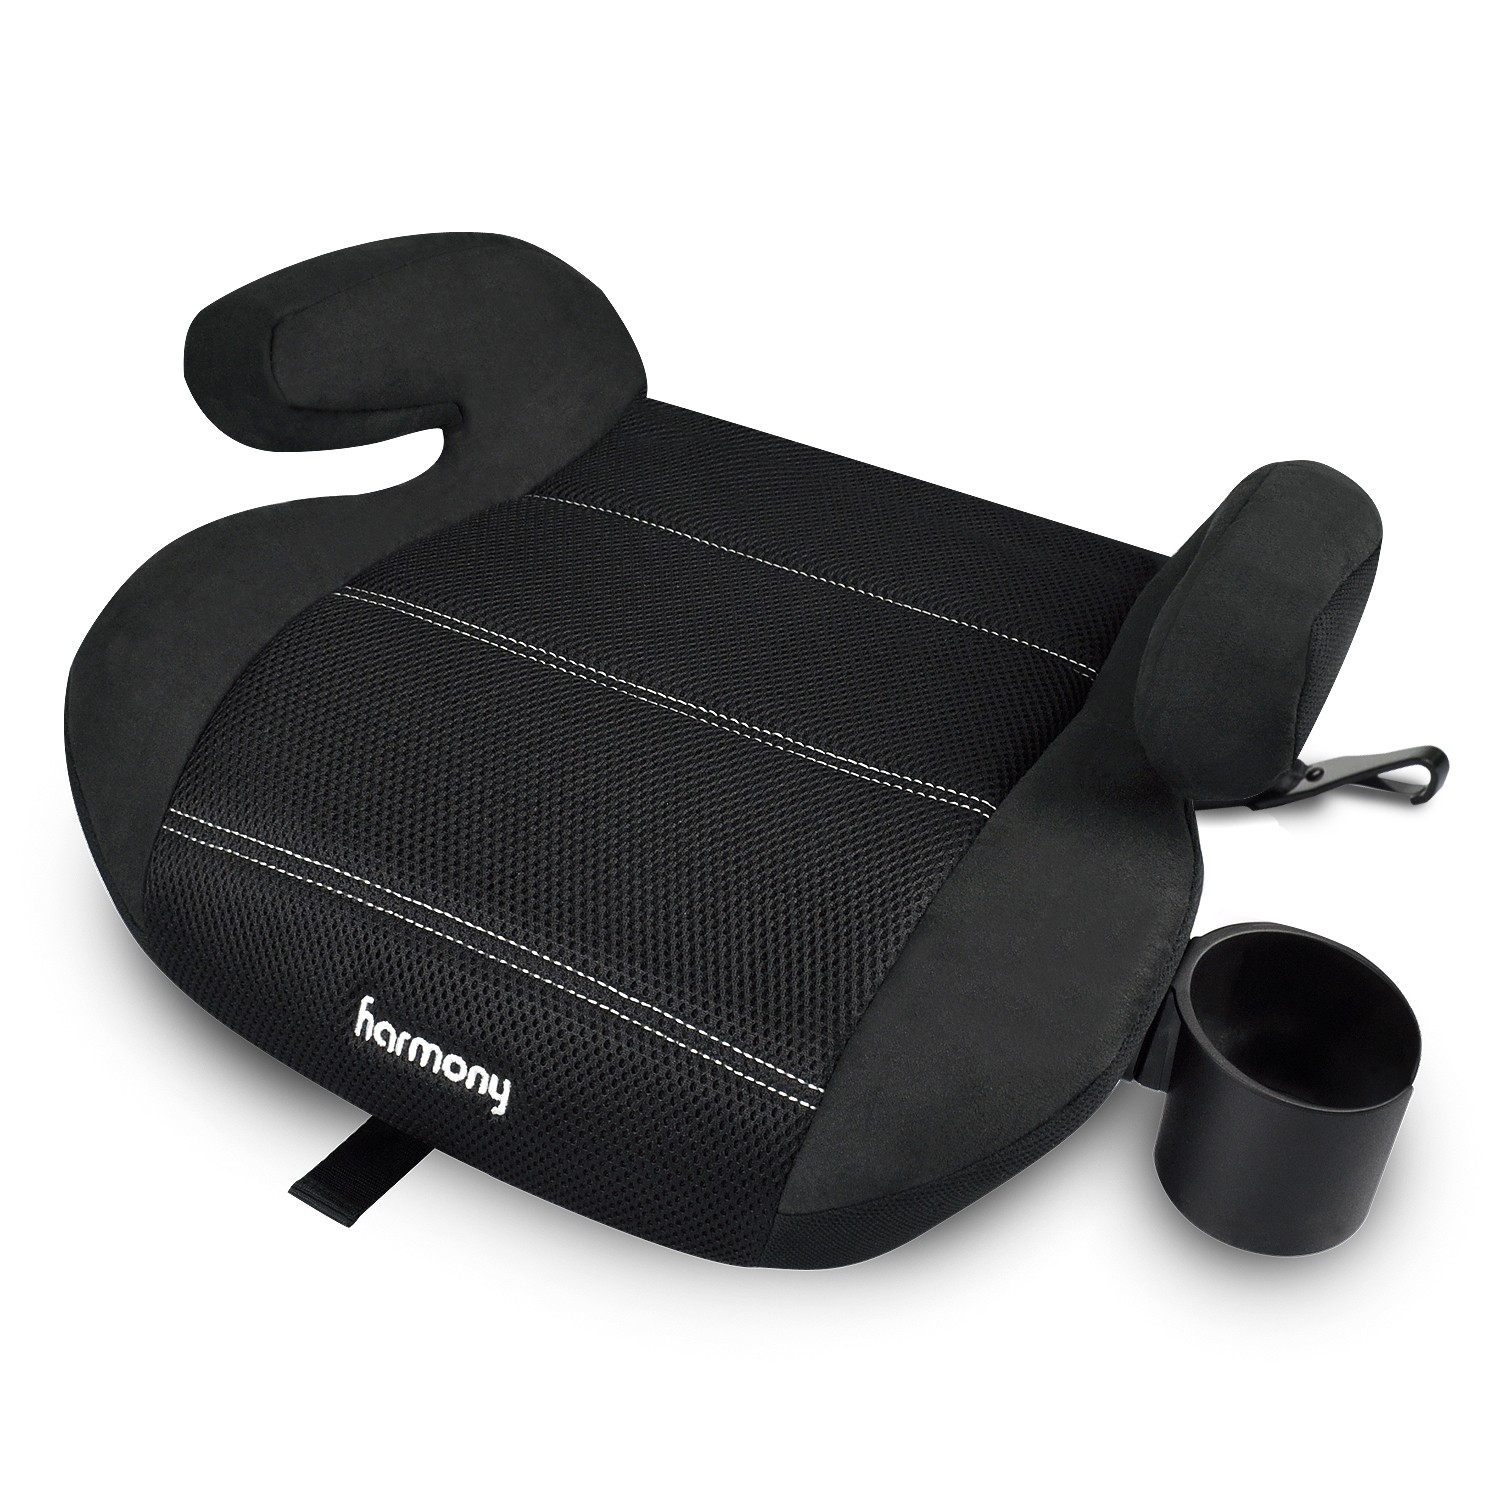 Dreamtime Elite Comfort Booster Car Seat with LATCH - Black